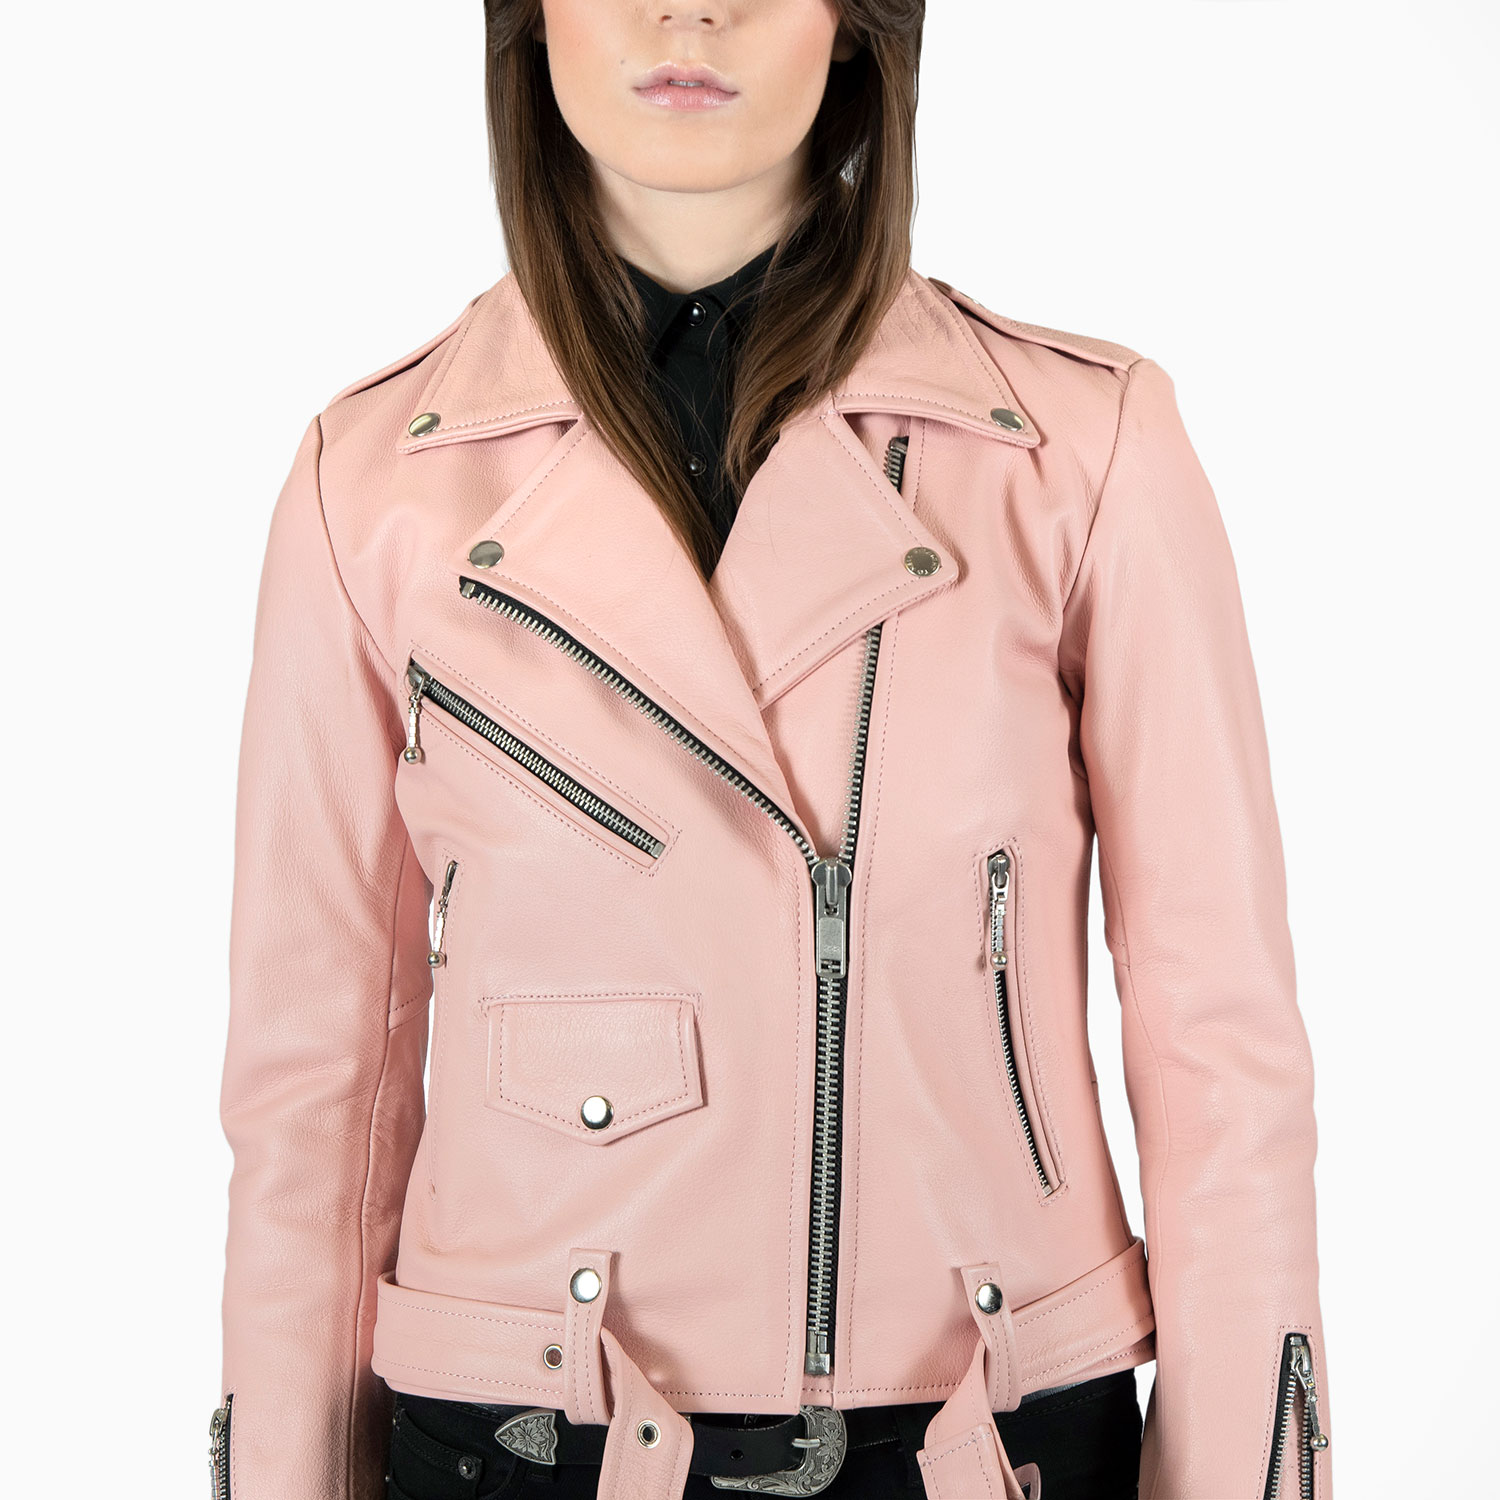 Commando Apparel Straight XL, Jacket 3XL, 4XL) To L, | - Dusty M, (Size 2XL, Leather XS, Hell S, Pink